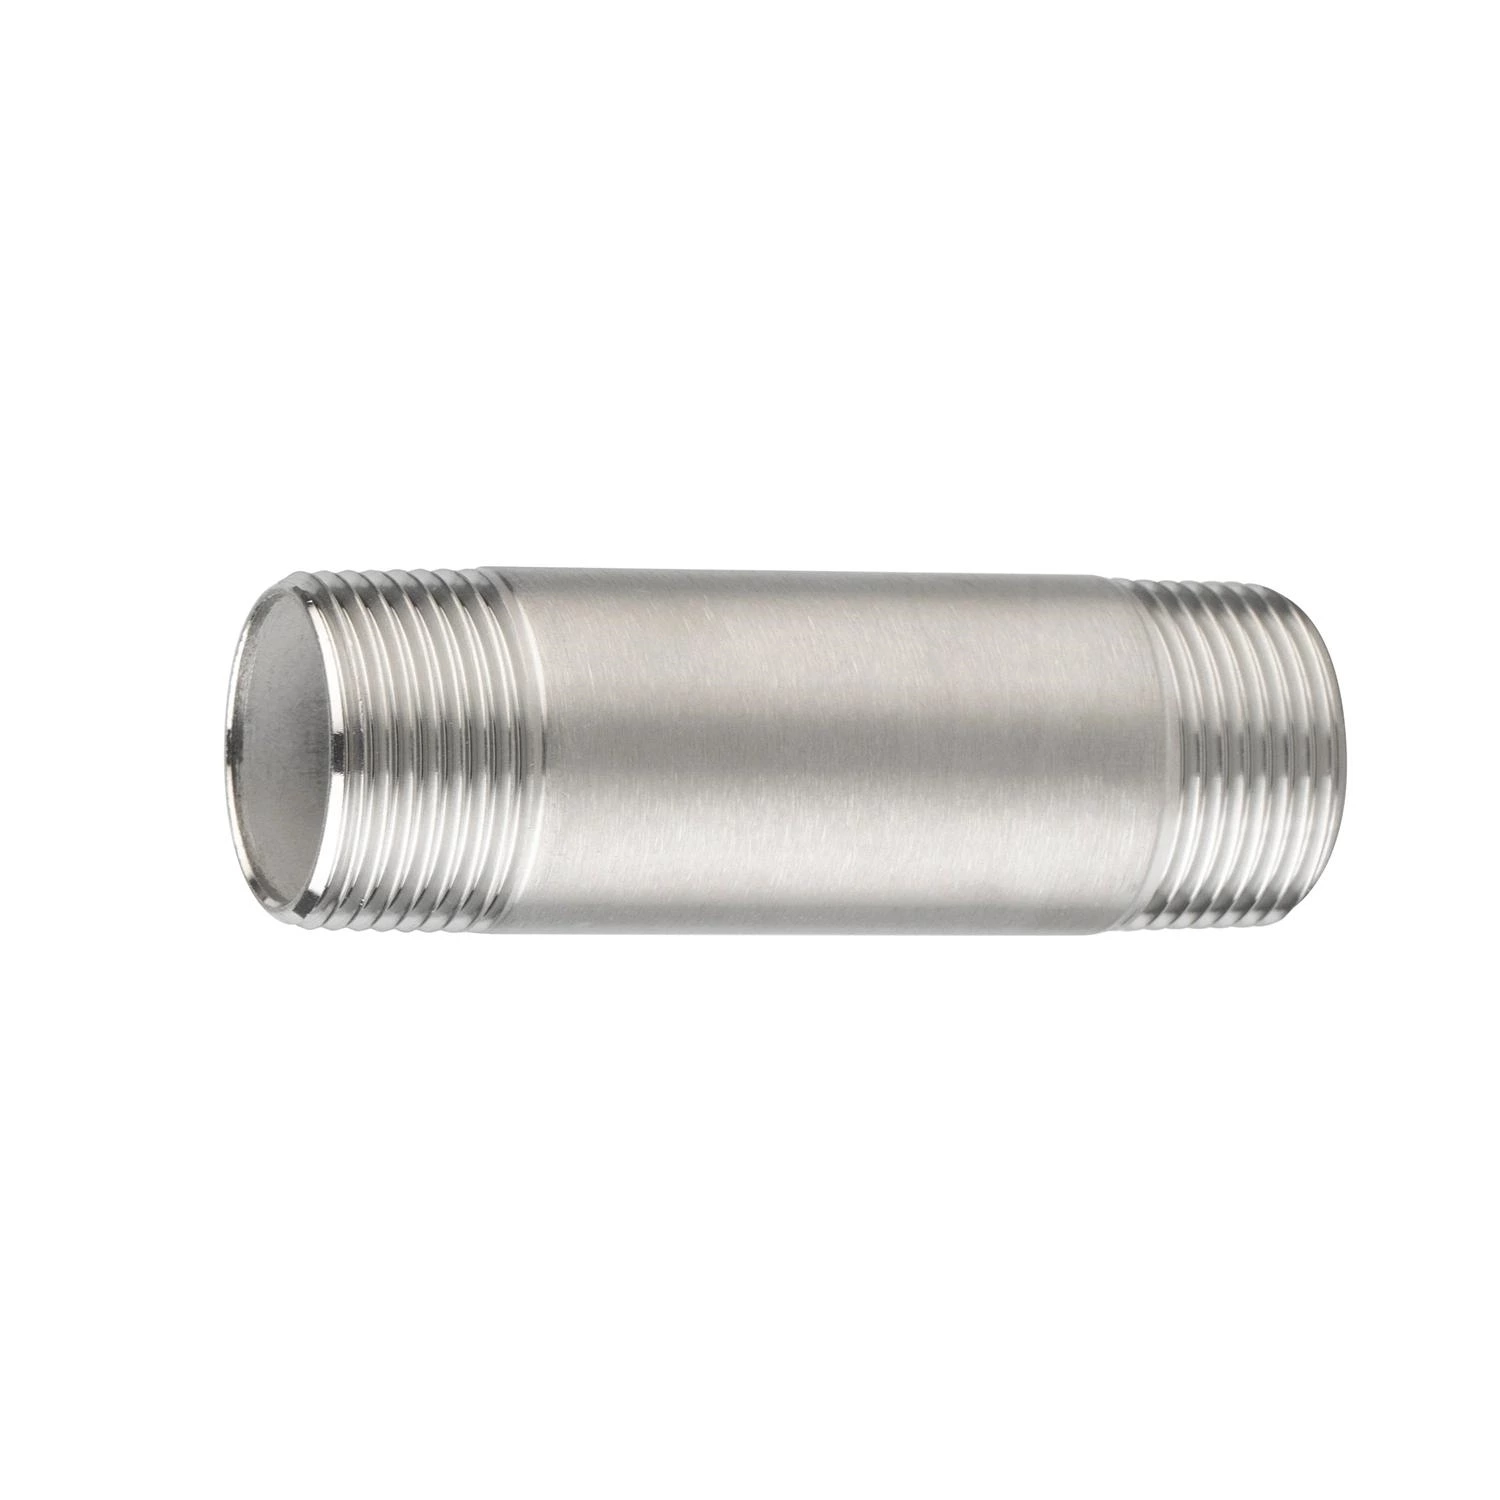 Stainless Steel Pipe Fitting 304 1/4"-4" NPT/BSPT Double Threaded Nipple